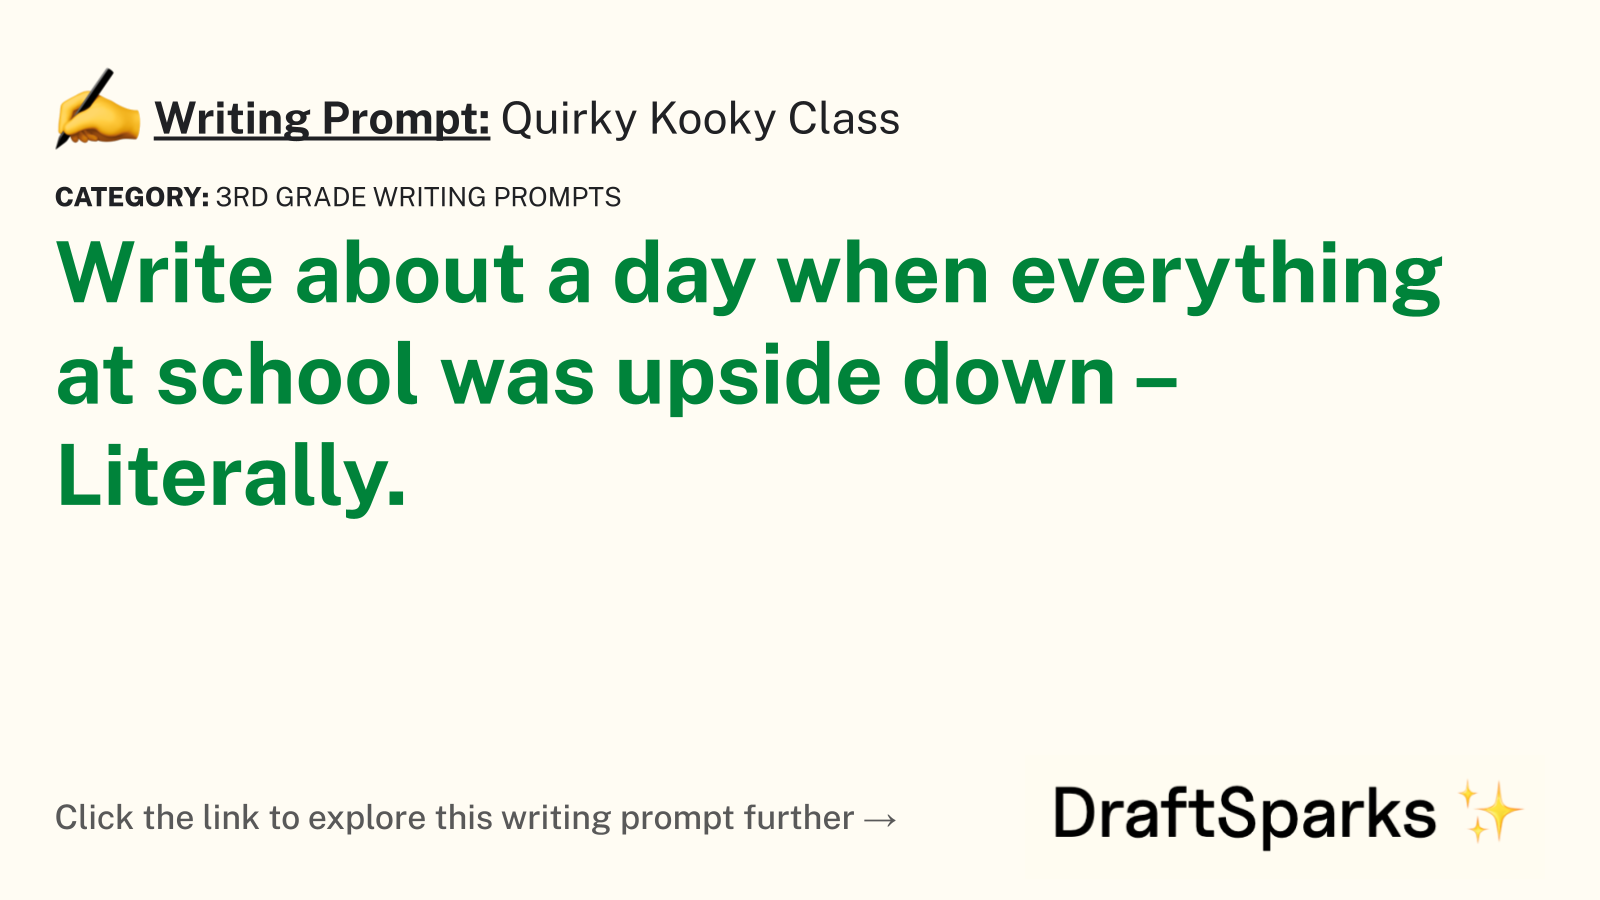 Quirky Kooky Class